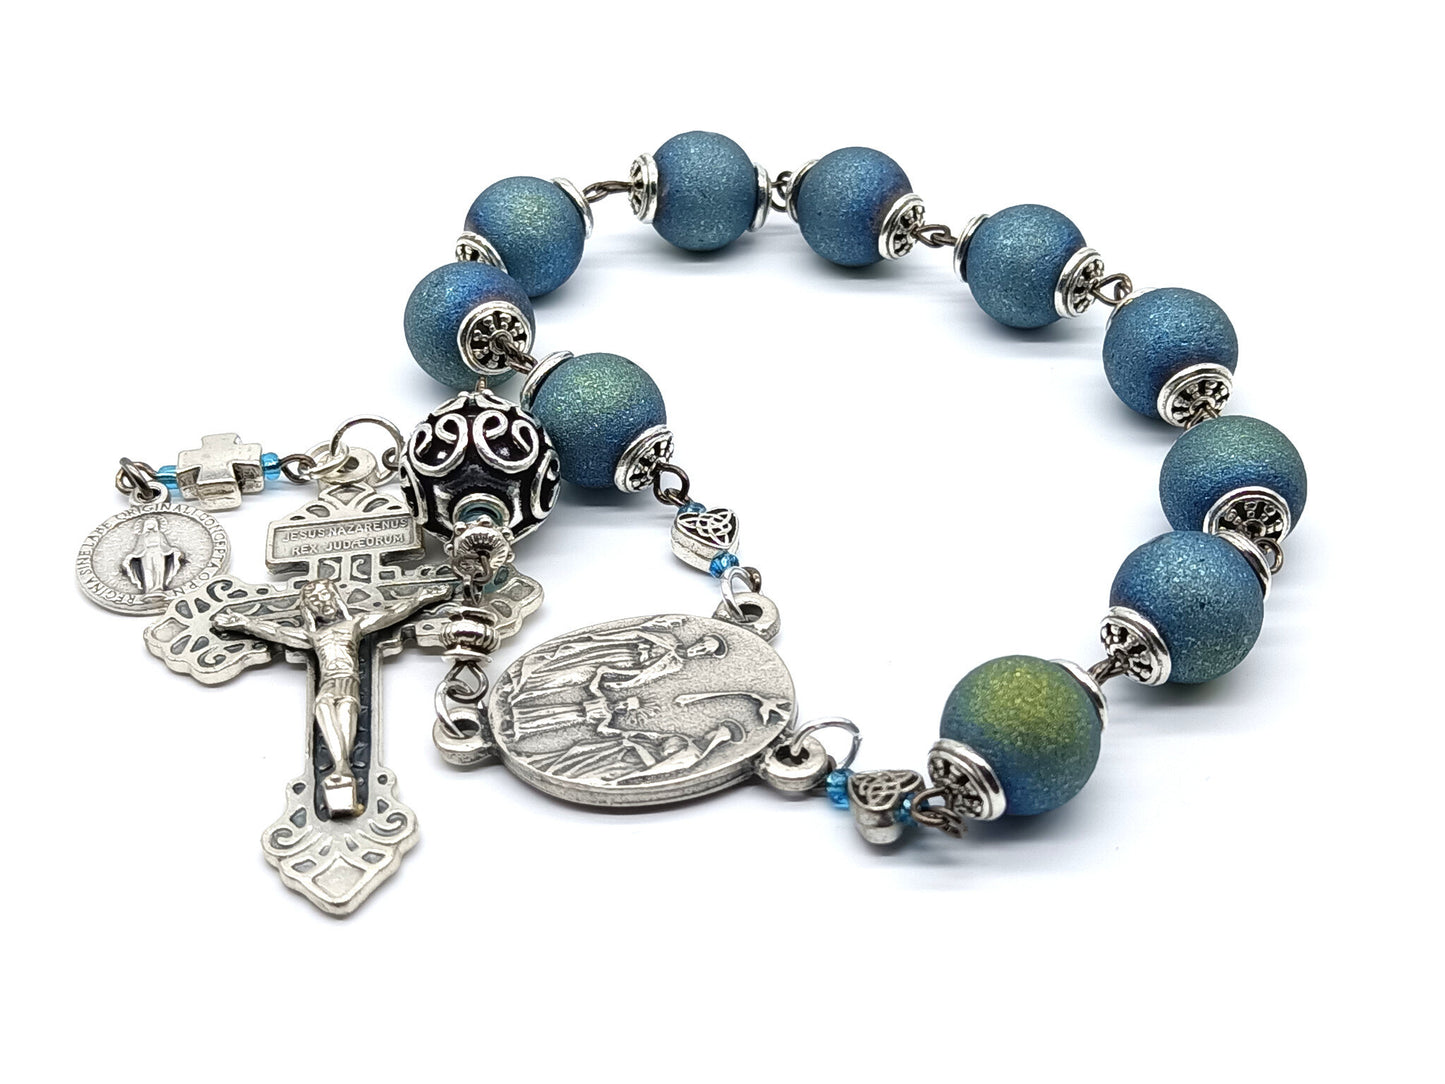 Three Heart of Jesus, Mary and Joseph unique rosary beads single decade with silver pardon crucifix, pater bead, centre medal and blue textured beads.